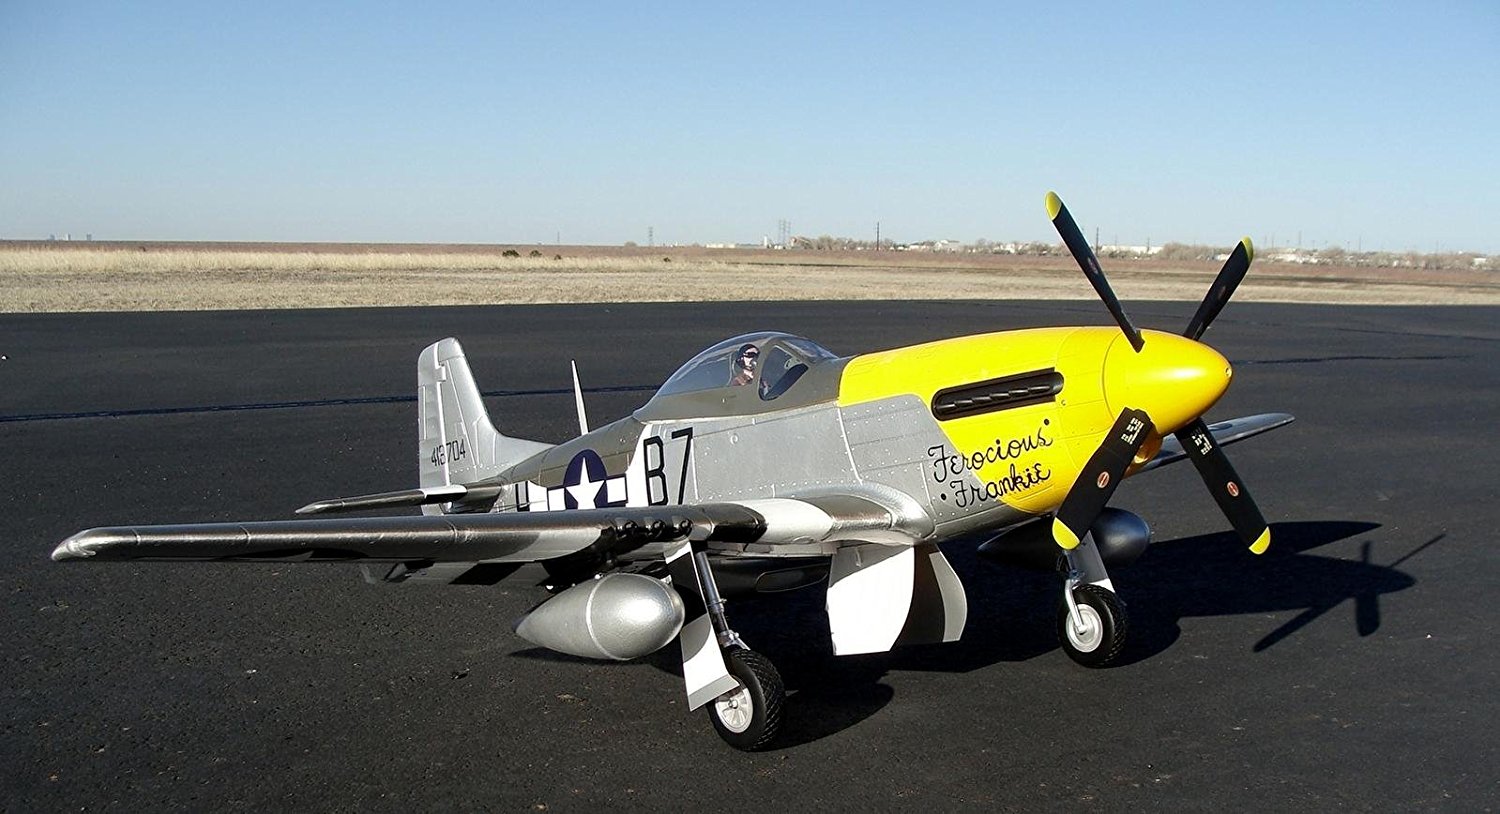 FMS P-51 Mustang Ferocious Frankie 6CH 1700mm (66.9") Wingspan with Flaps LED Retracs PNP RC Airplane Warbird